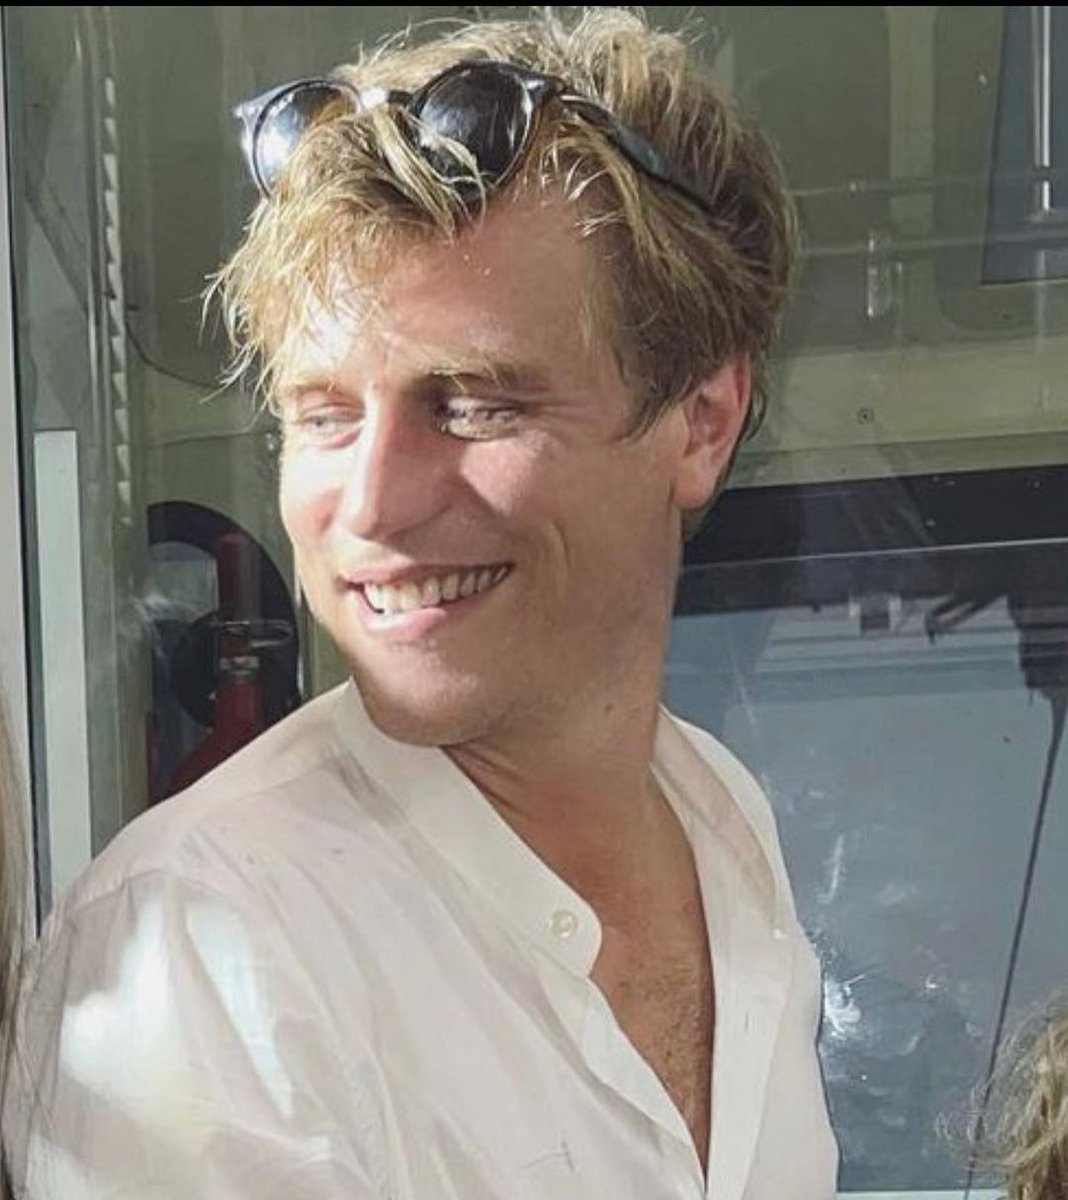 Johnny Flynn spotted in Capri (Italy) while filming #TheTalentedMrRipley series where he plays Dickie Greenleaf 👀🔥❤️